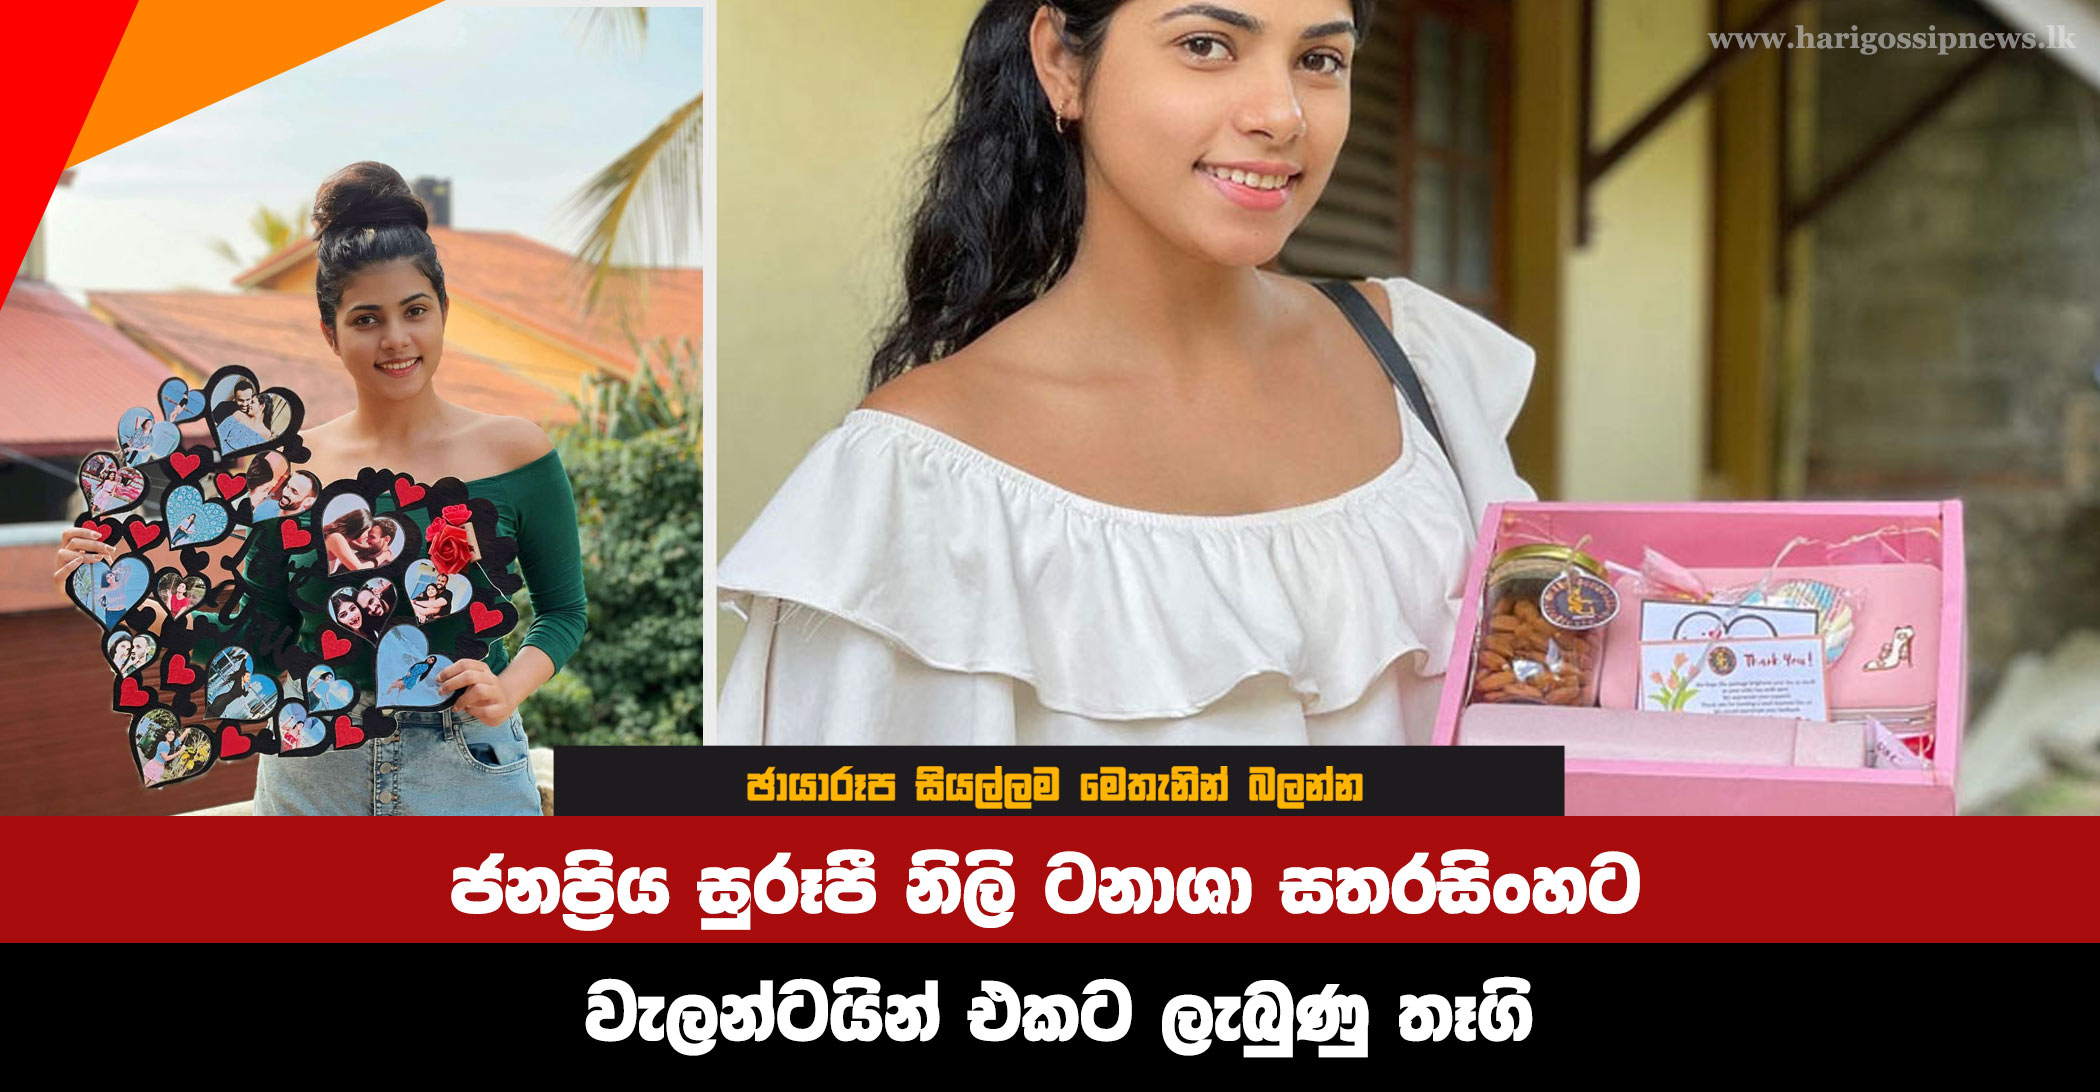 Popular actress Tanasha Satharasinghe's Valentine's gift for victory